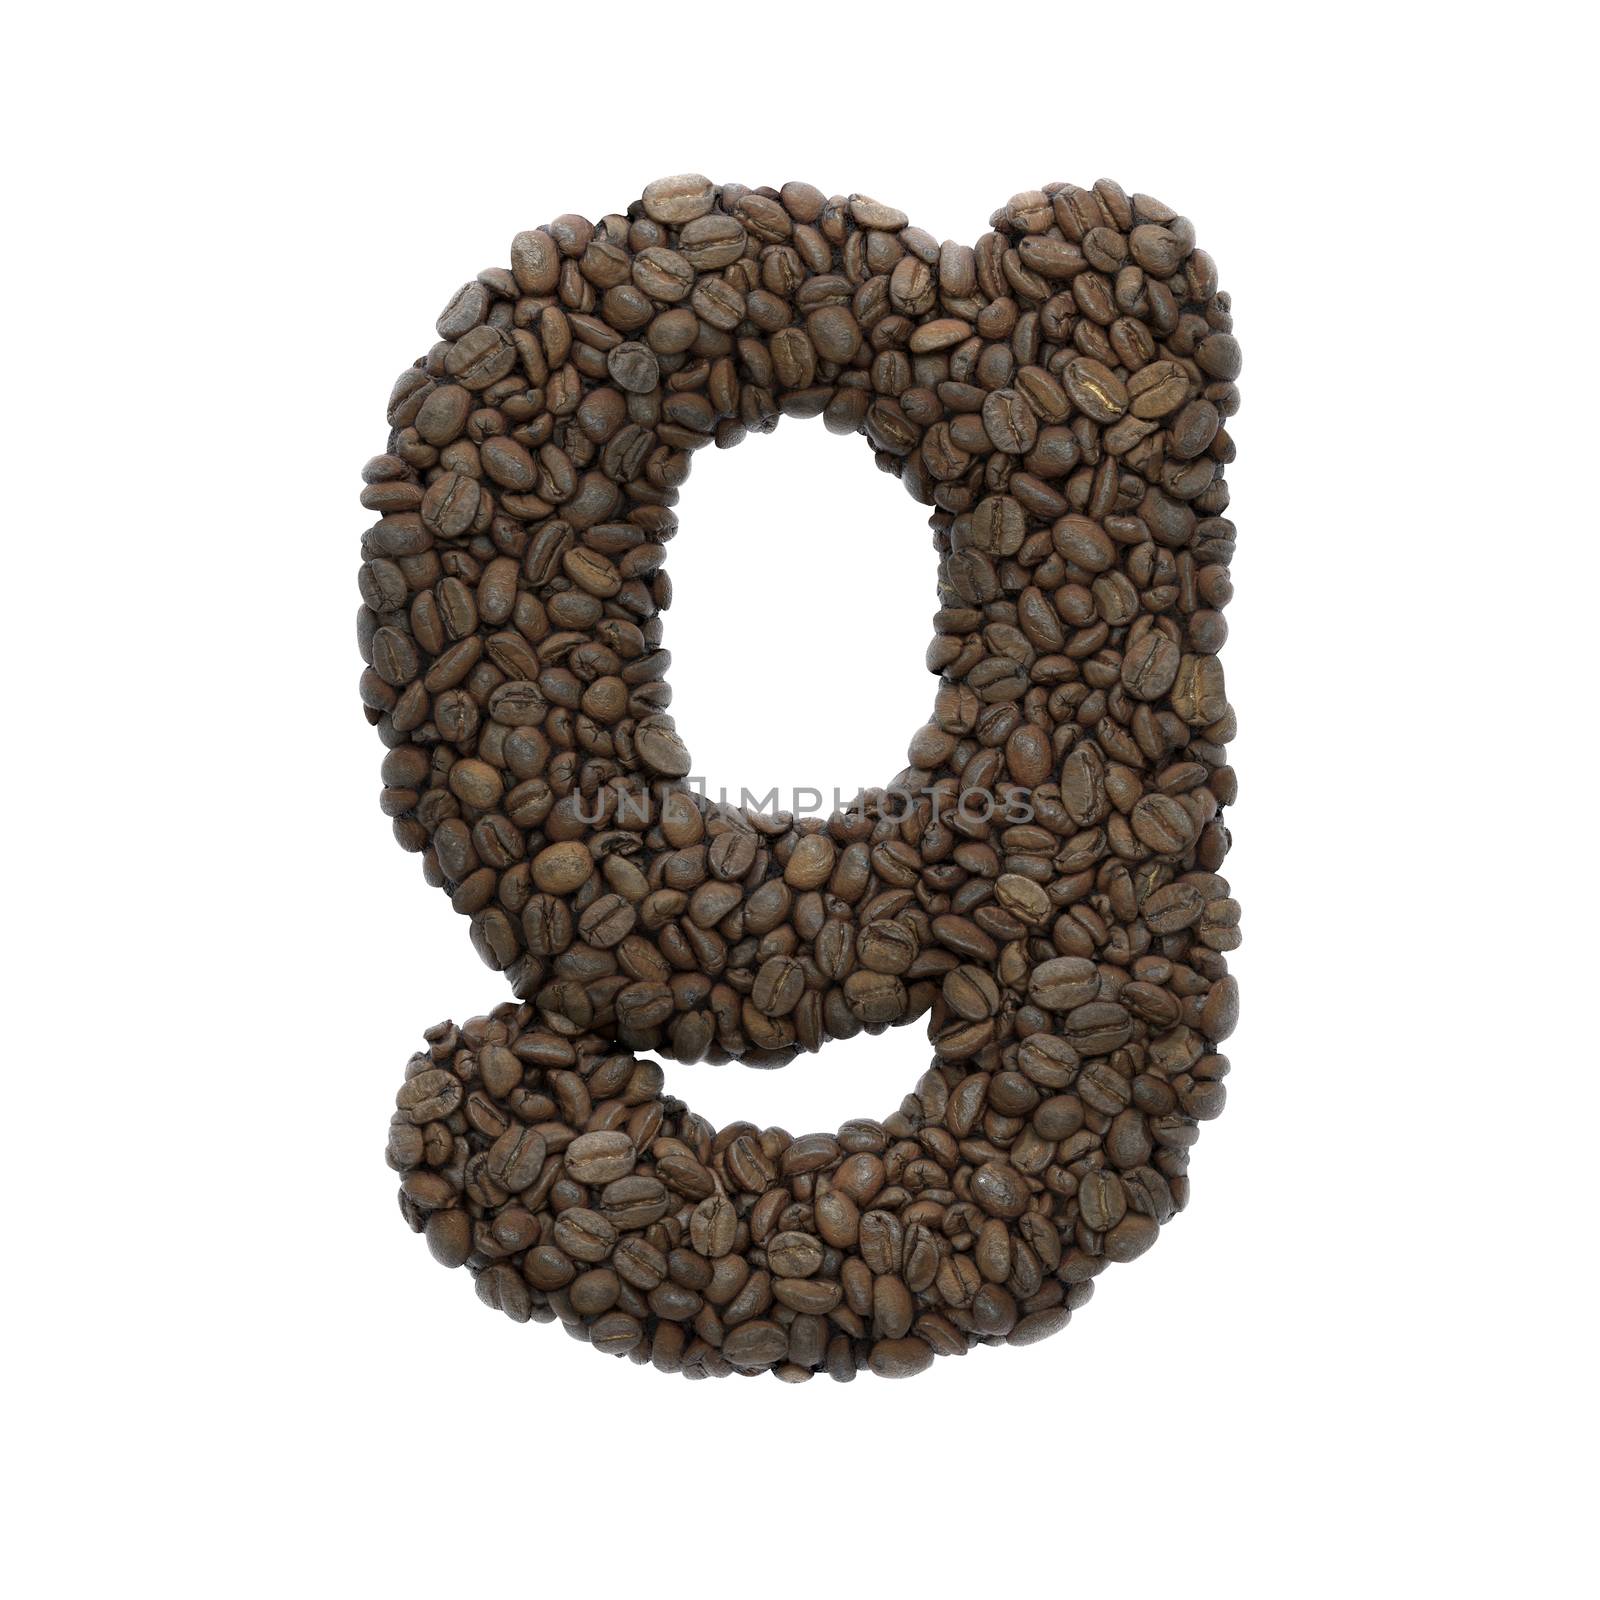 Coffee letter G - Small 3d roasted beans font - Suitable for Coffee, energy or insomnia related subjects by chrisroll